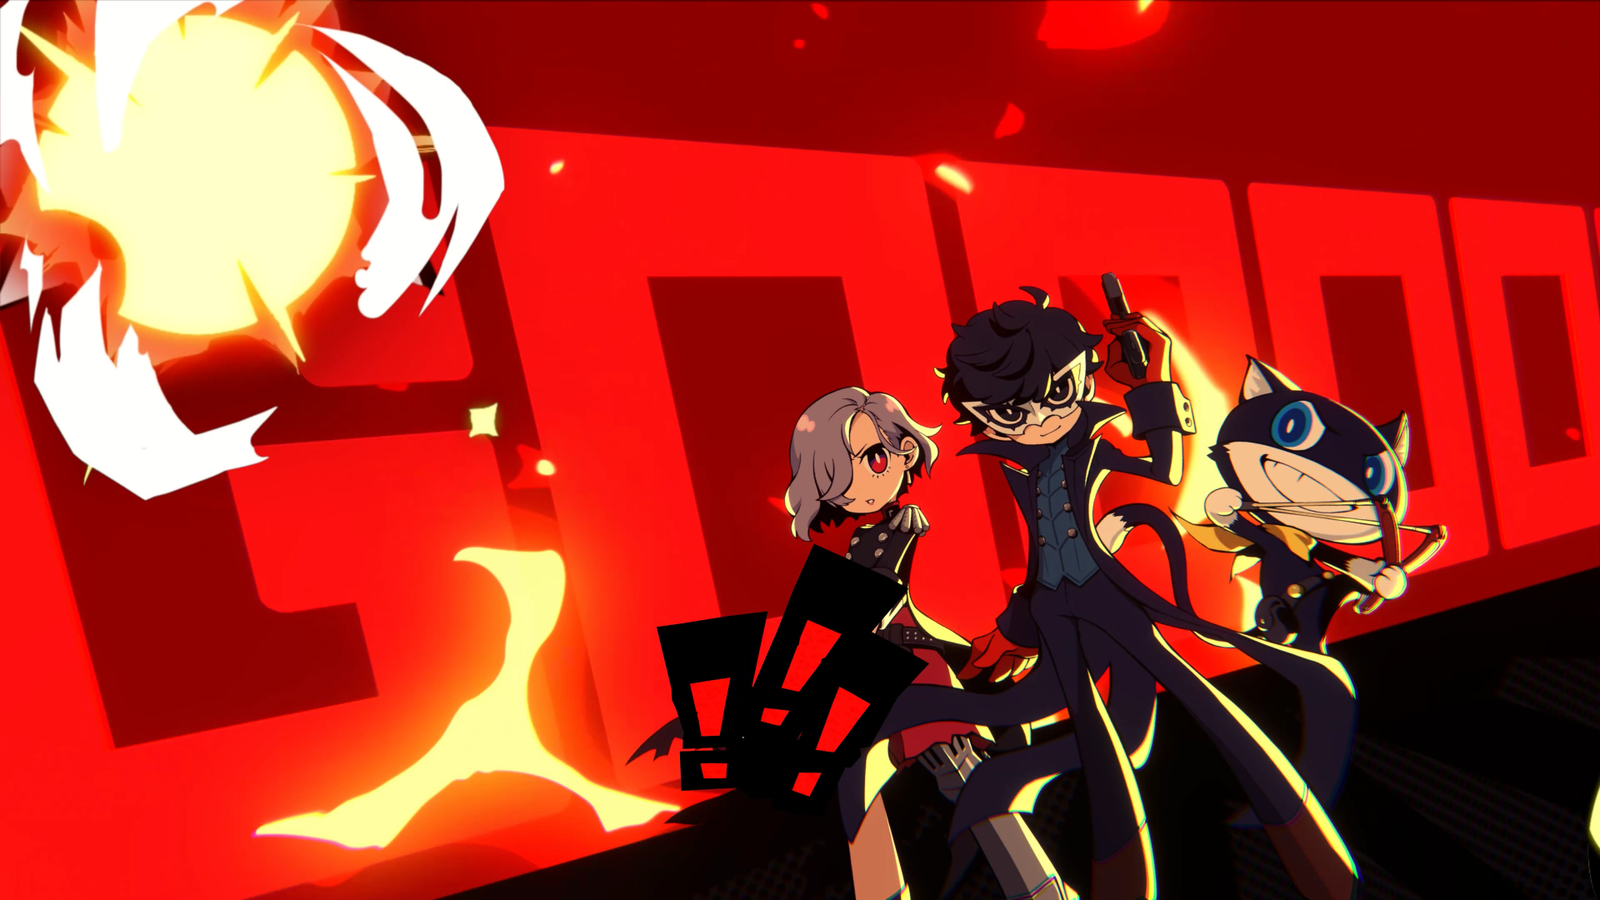 Persona 5 Tactica is a simplified, cute extension of Atlus' best